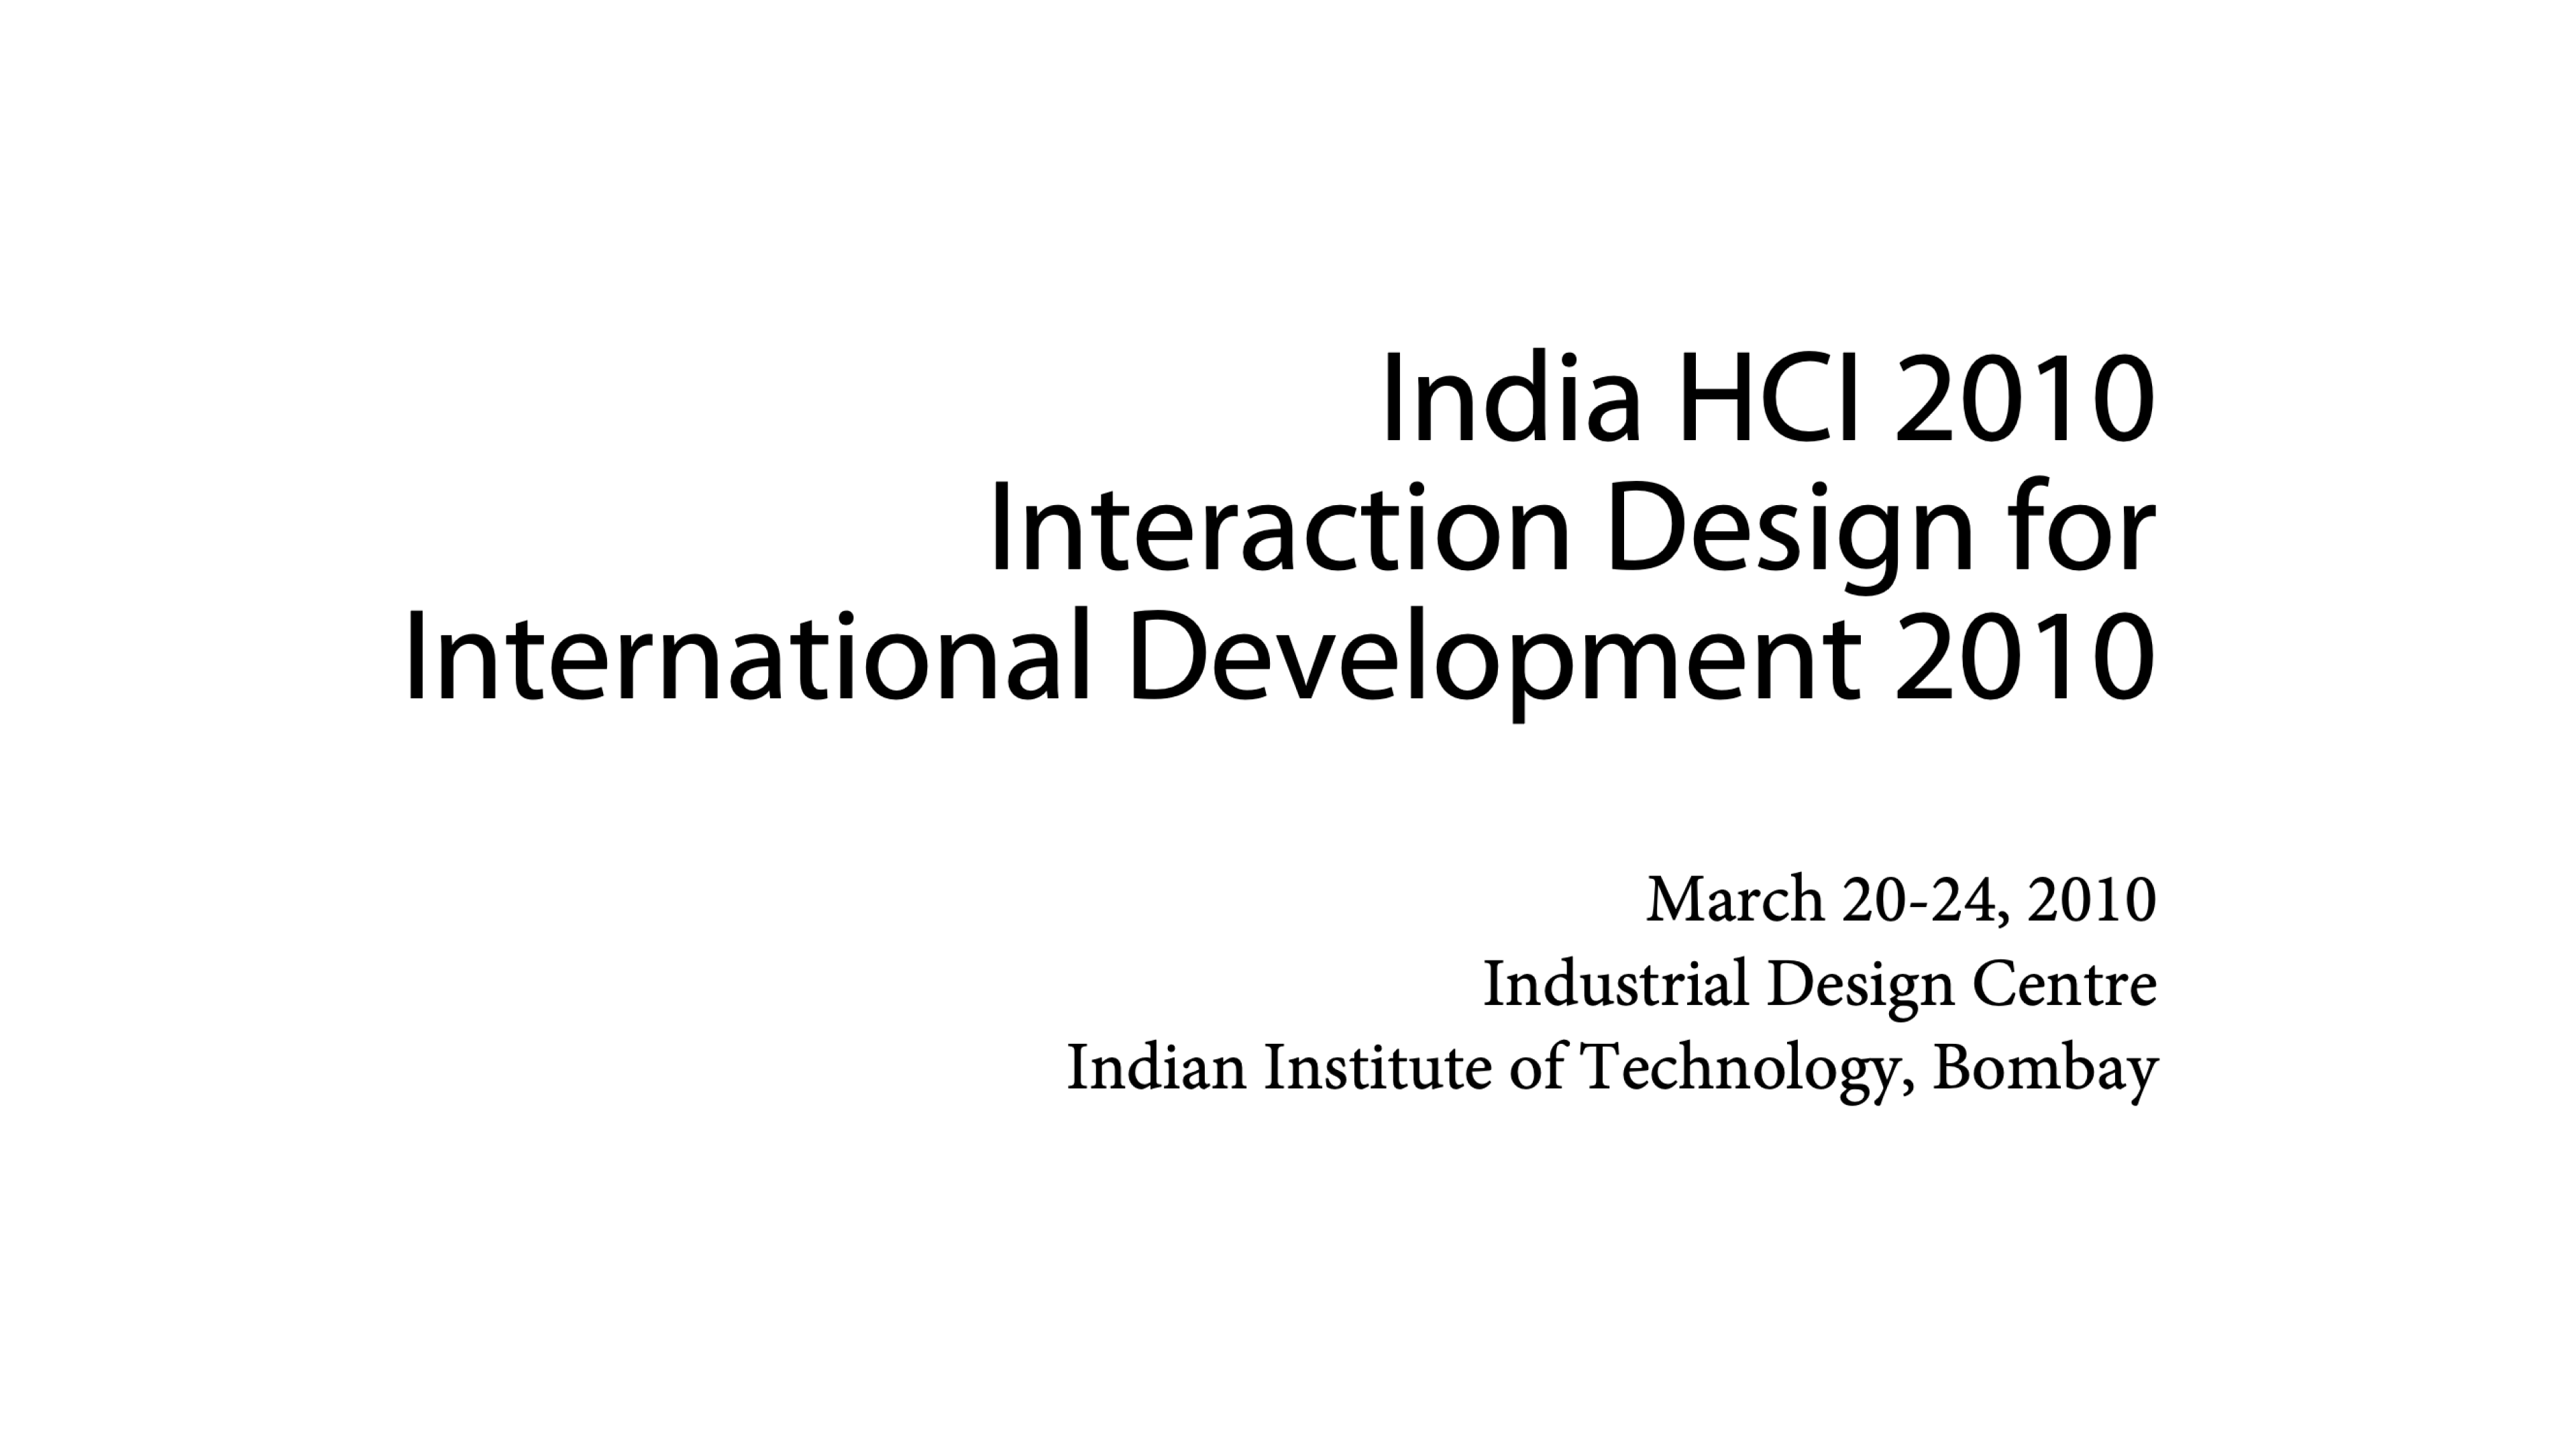 I’m presenting a tutorial at the India HCI 2010 conference, IIT Mumbai, March 21